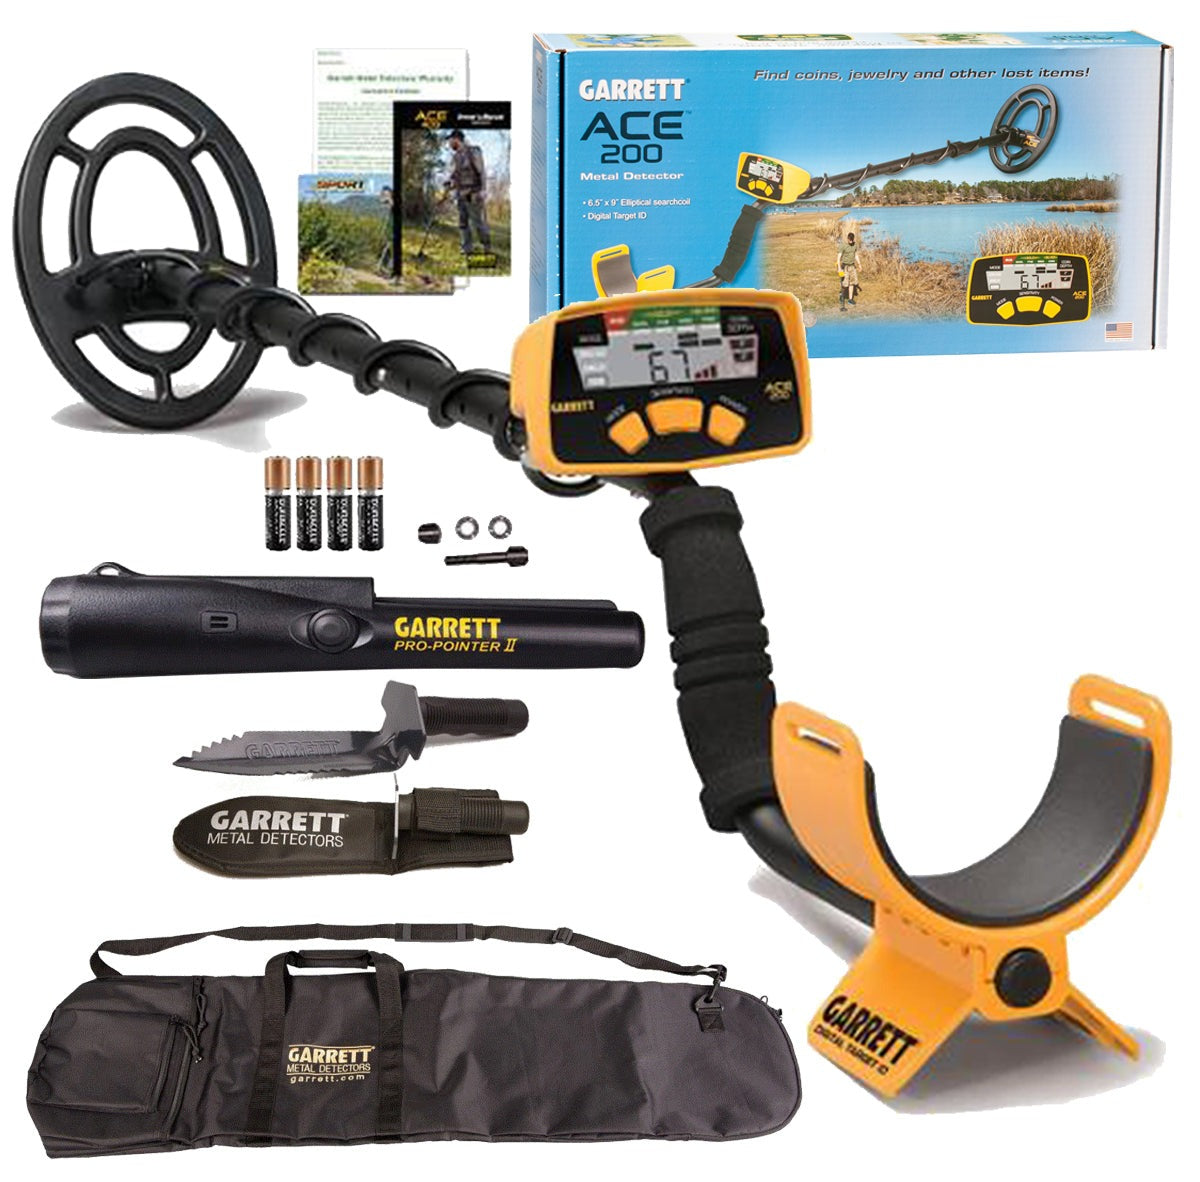 Garrett ACE 200 Metal Detector with Pro-Pointer II, All-Purpose Carry Bag, and Edge Digger